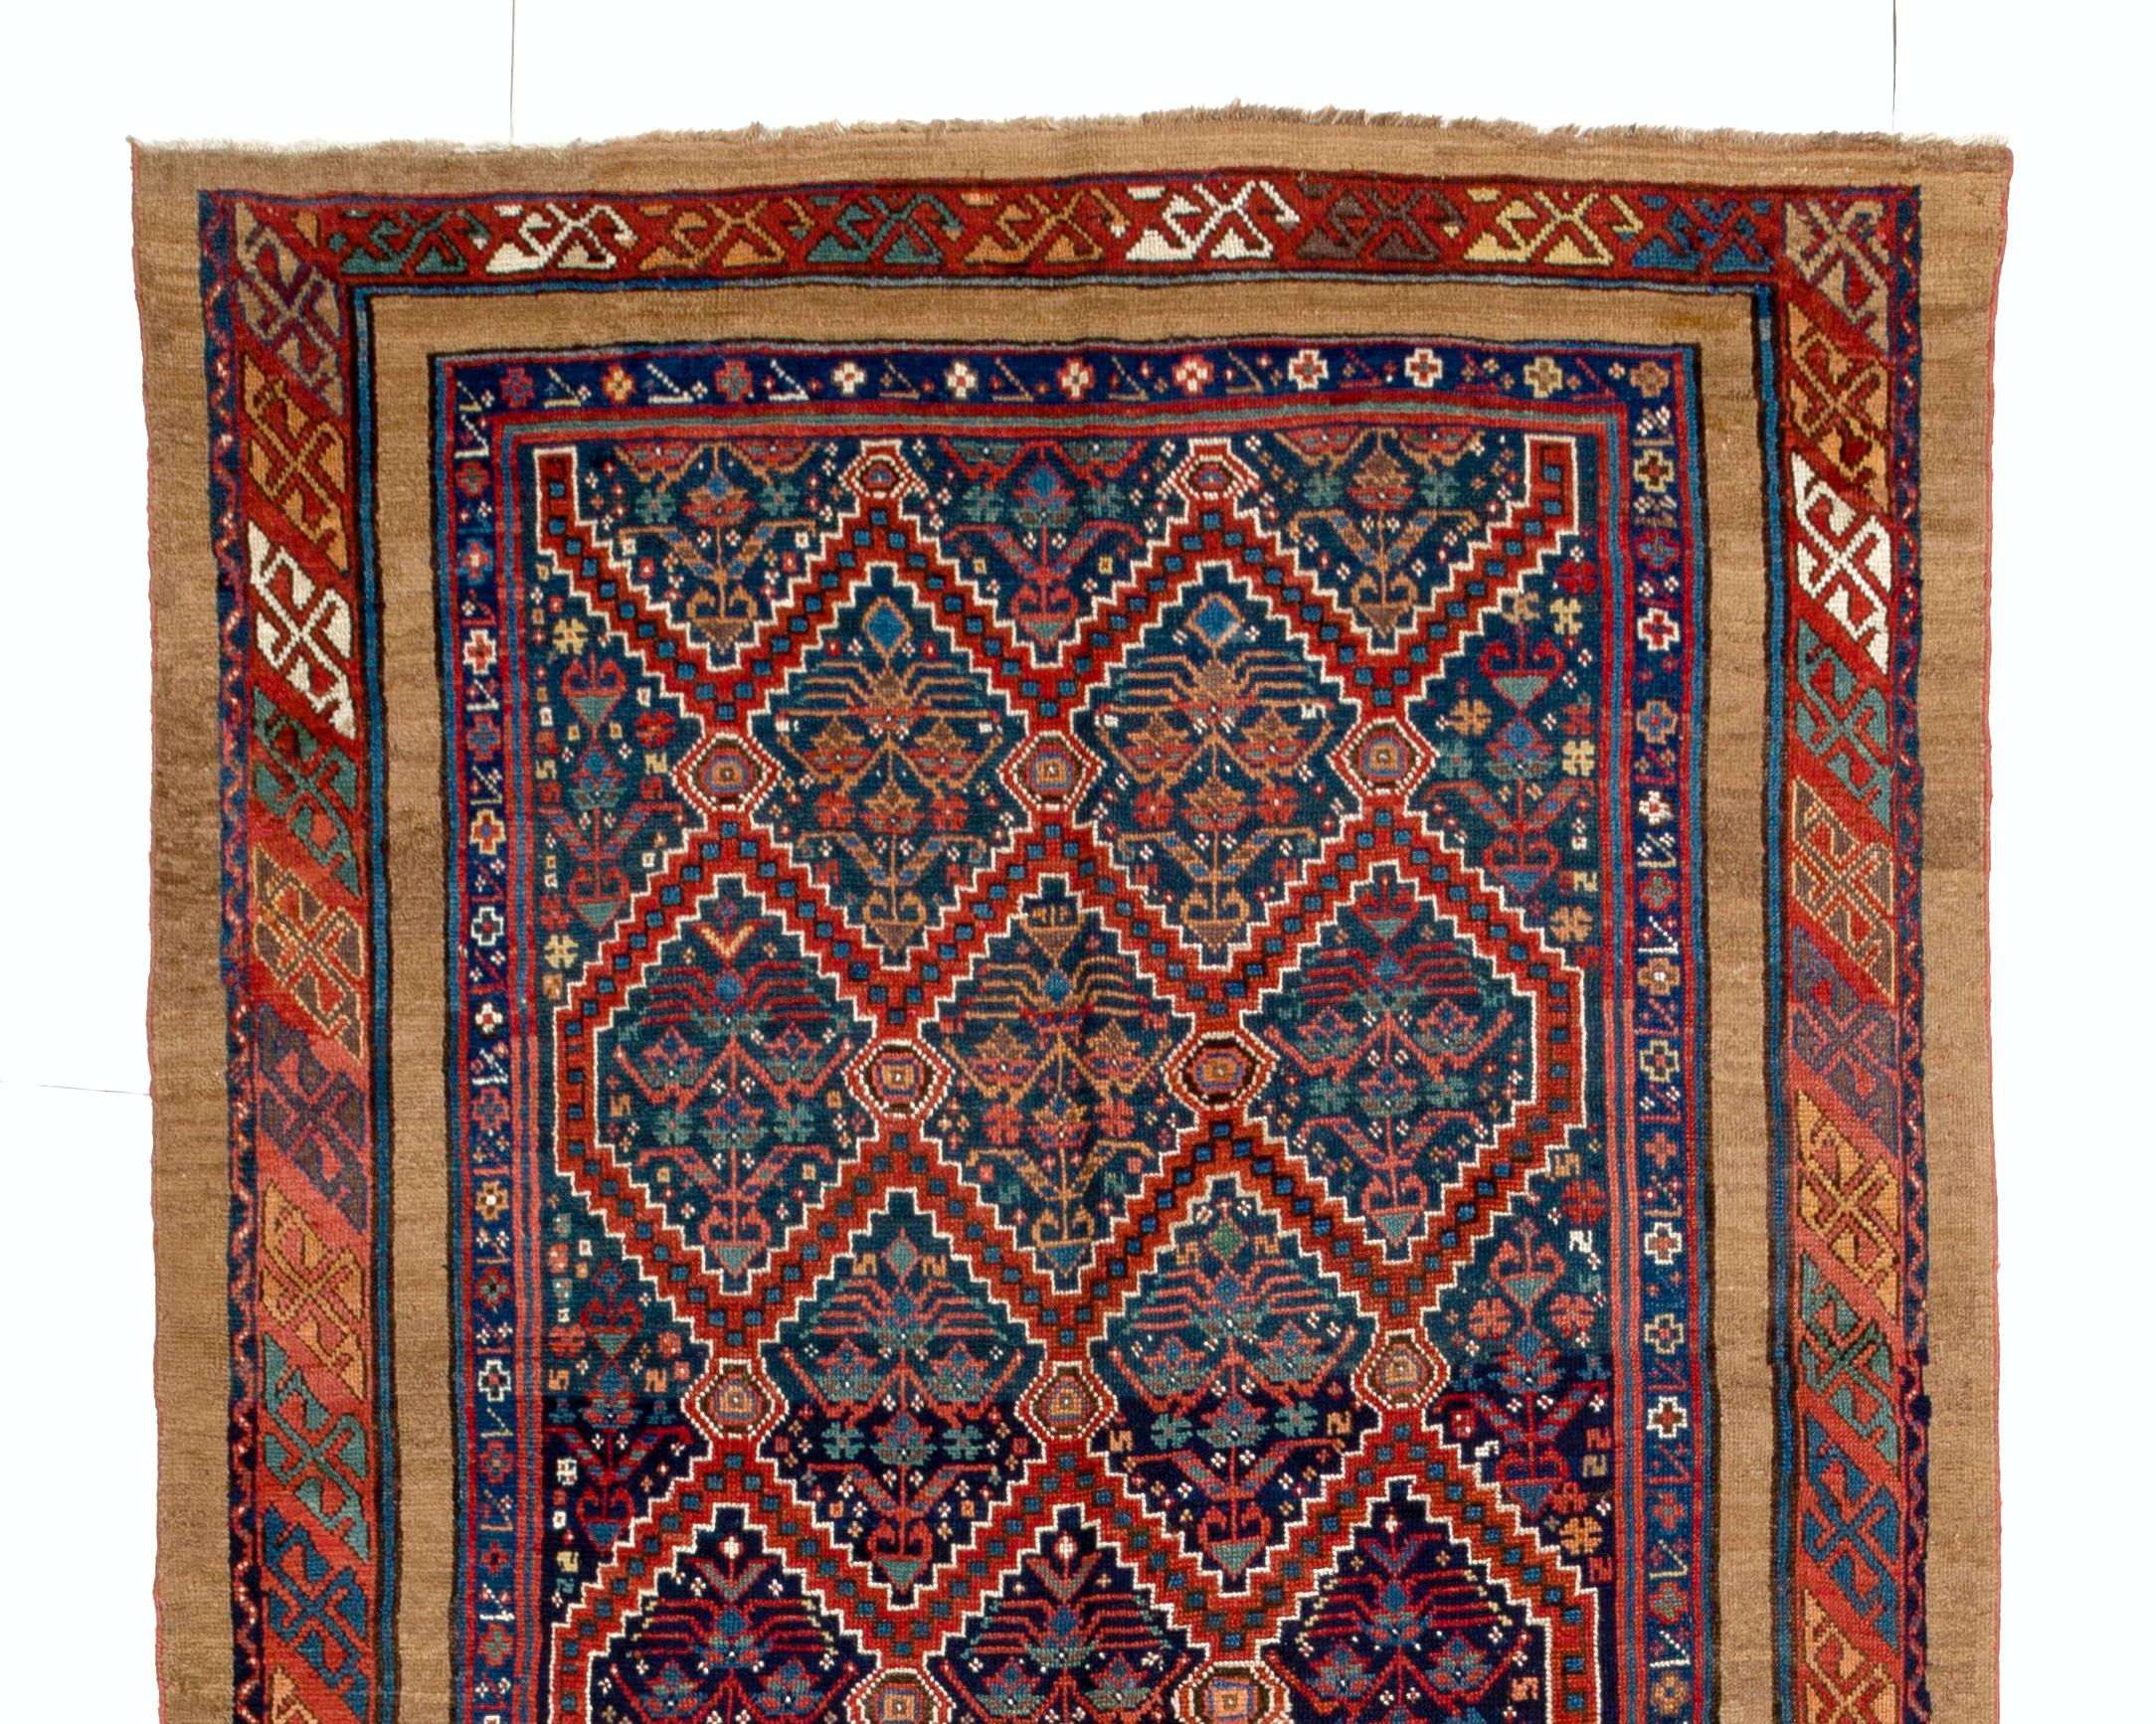 A fantastic Serab camel hair and wool runner, northwest Persia, circa 1875.
The rug is made of medium wool pile on wool foundation. It is heavy and lays flat on the floor, in very good condition with no issues. It has been washed professionally, The